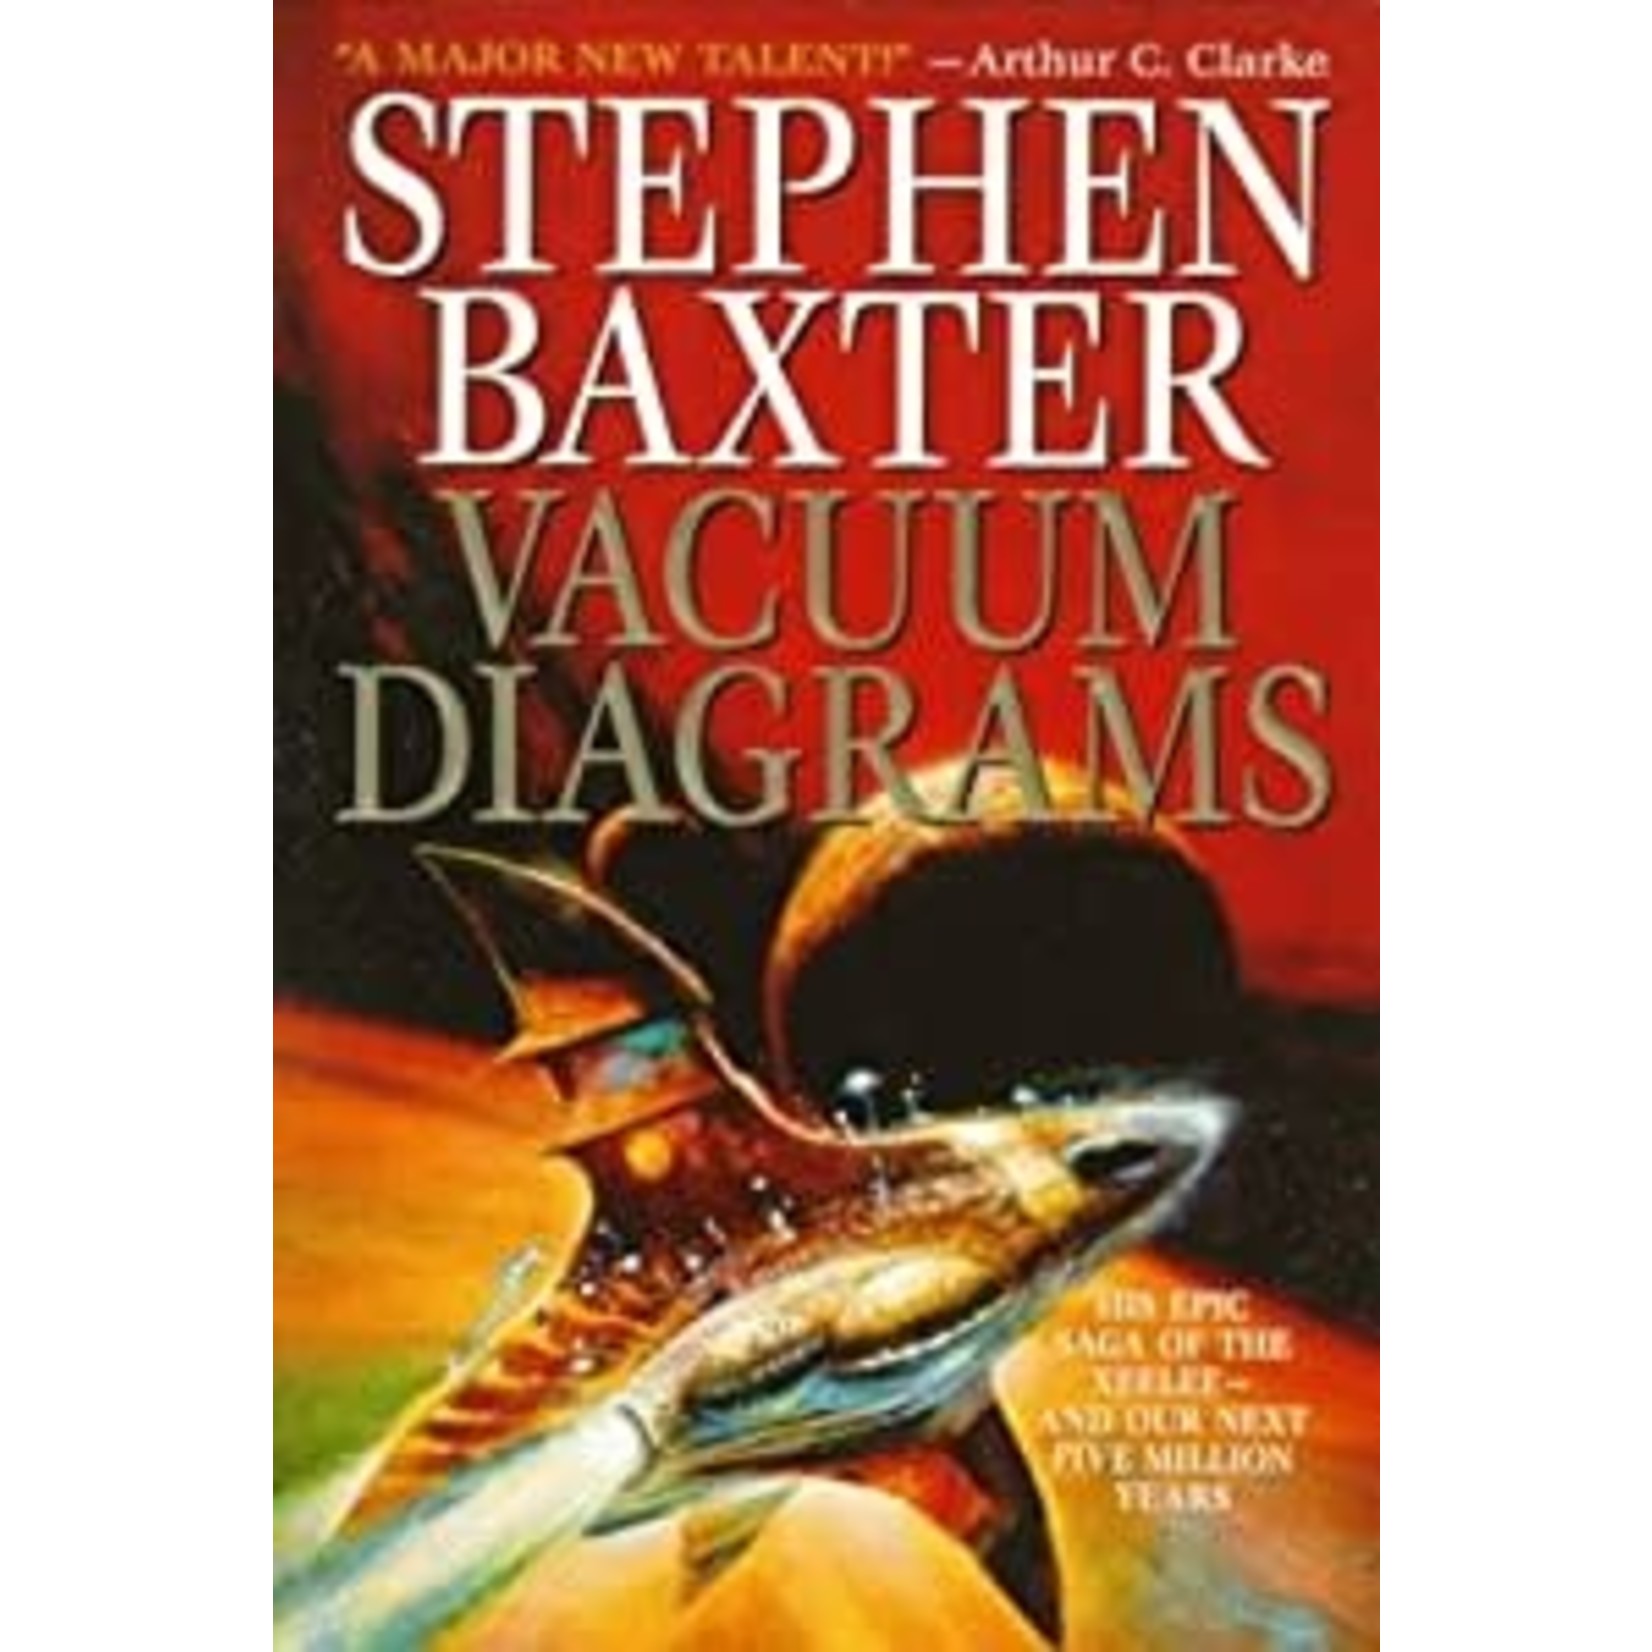 Baxter, Stephen Baxter, Stephen - Vacuum Diagrams: Stories of the Xeelee Sequence